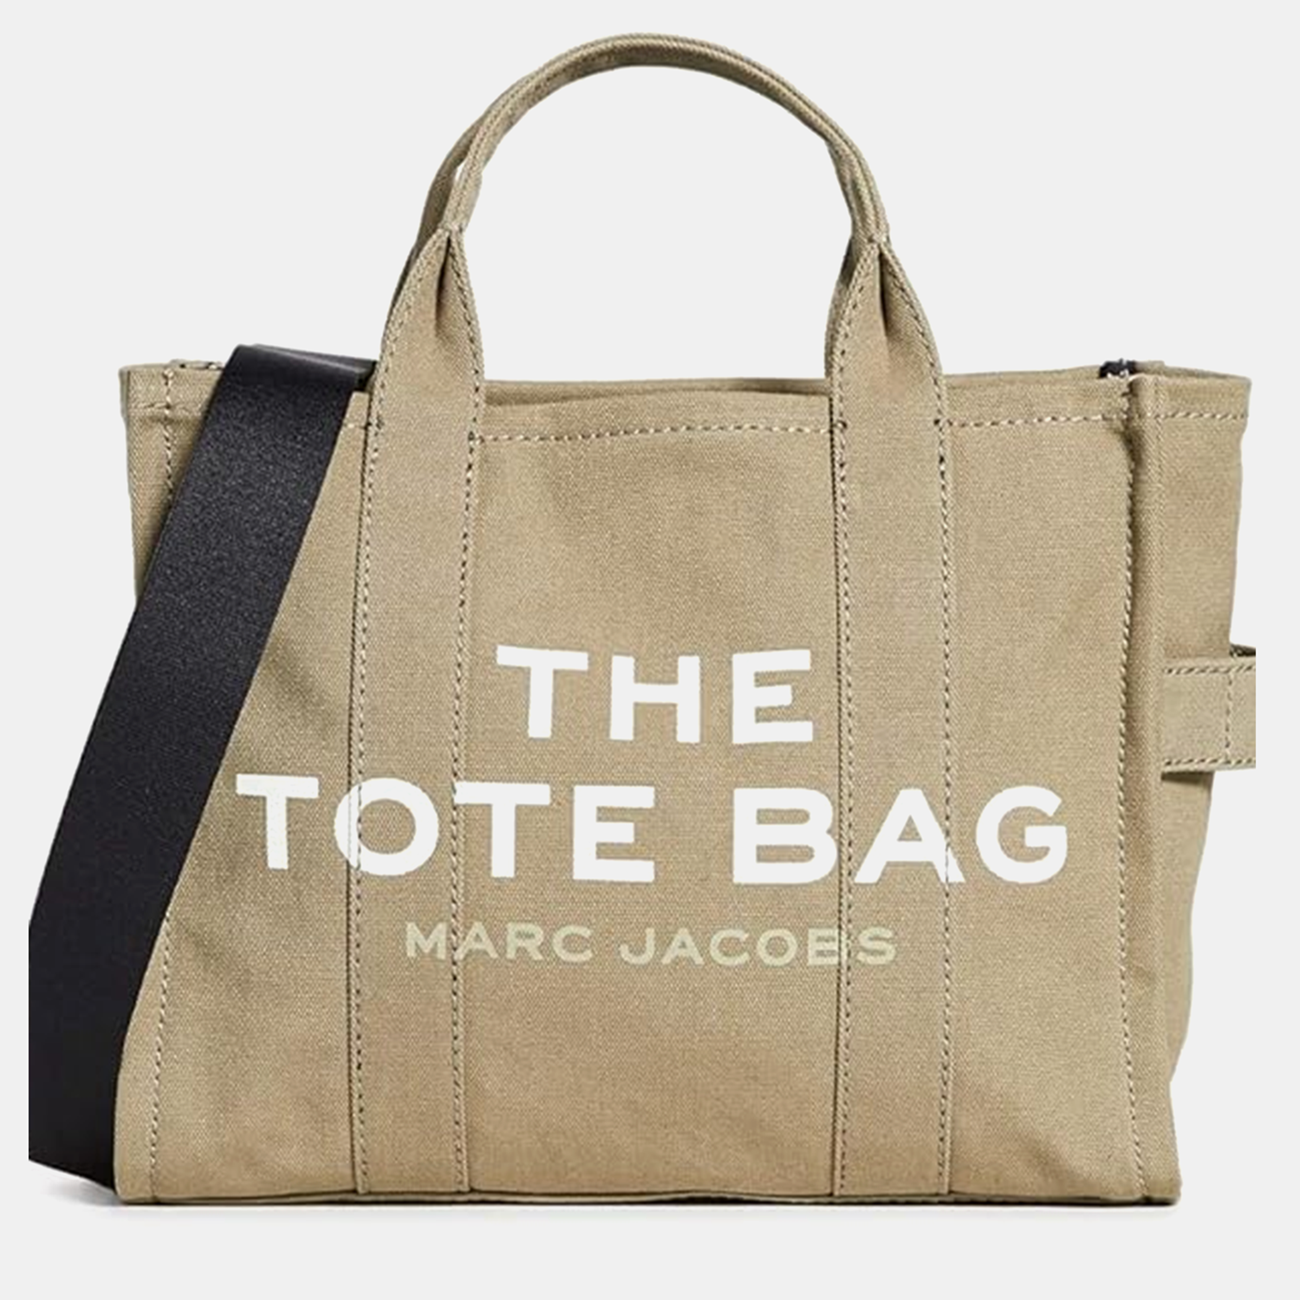 Elevate your every day with this Marc Jacobs tote. Meticulously designed it seamlessly blends functionality with luxury offering the perfect accessory to showcase your discerning style while effortlessly carrying your essentials.